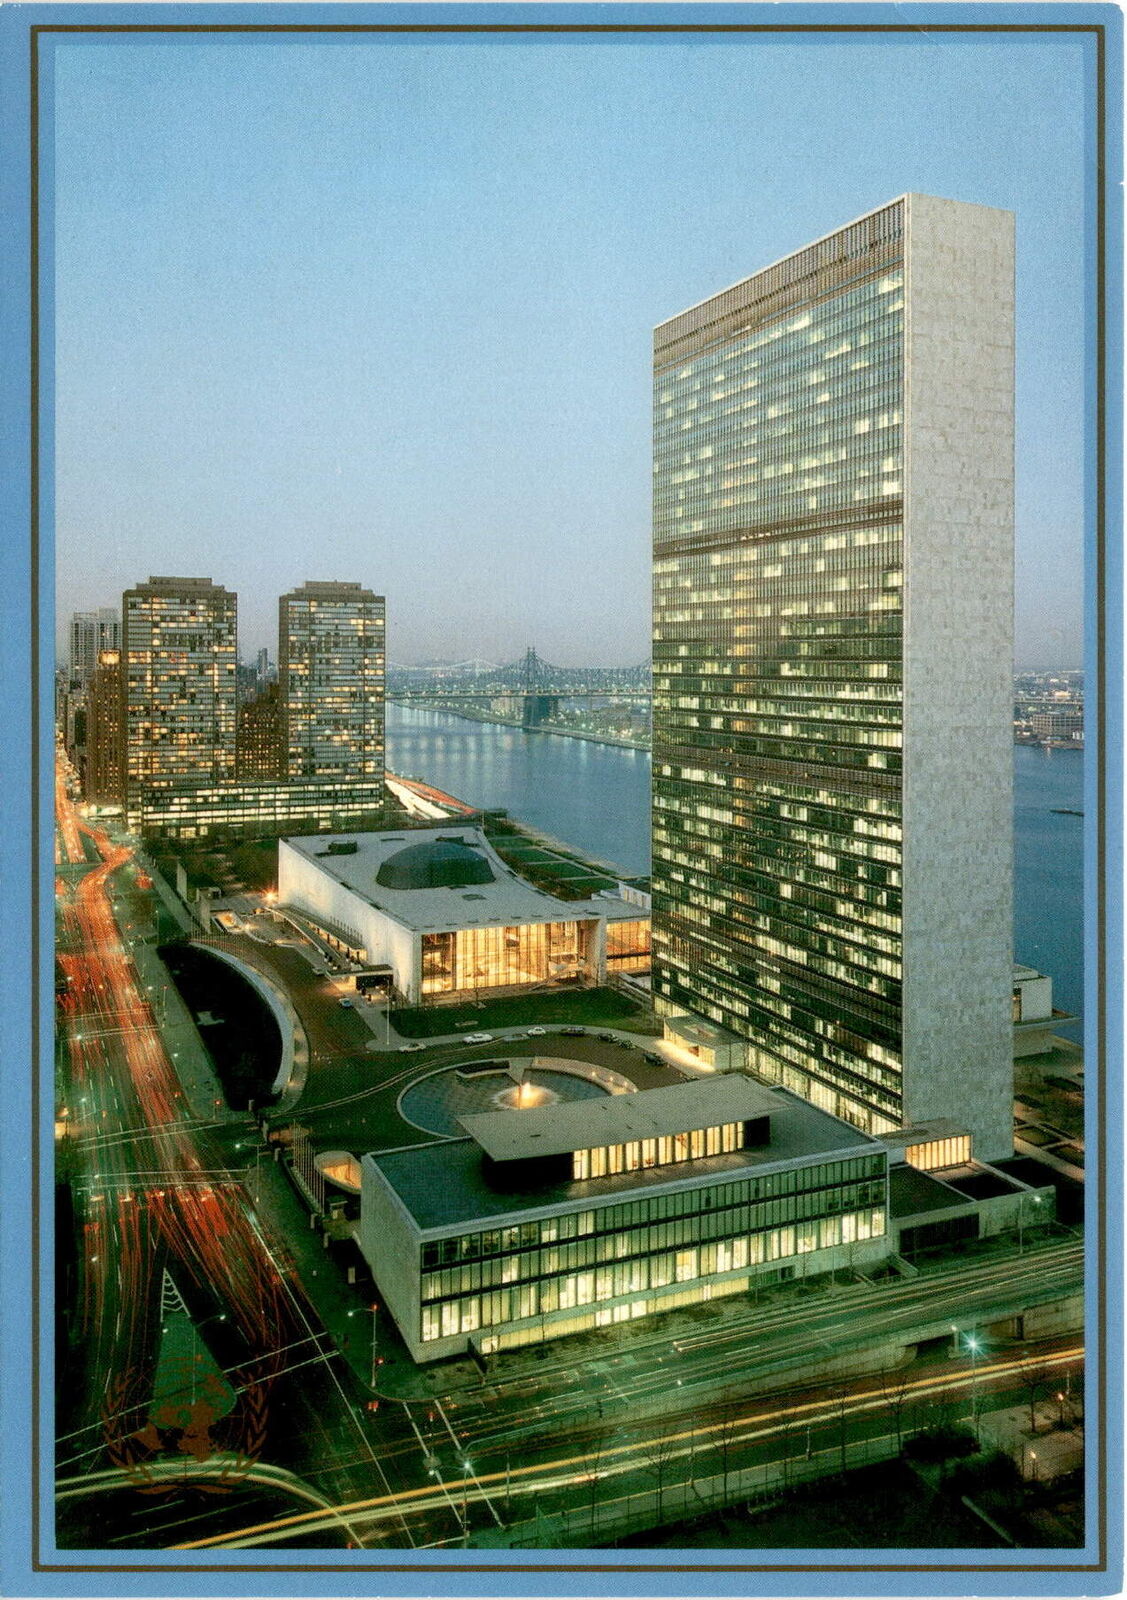 1989 United Nations Headquarters Night View Stamp - 36 cents